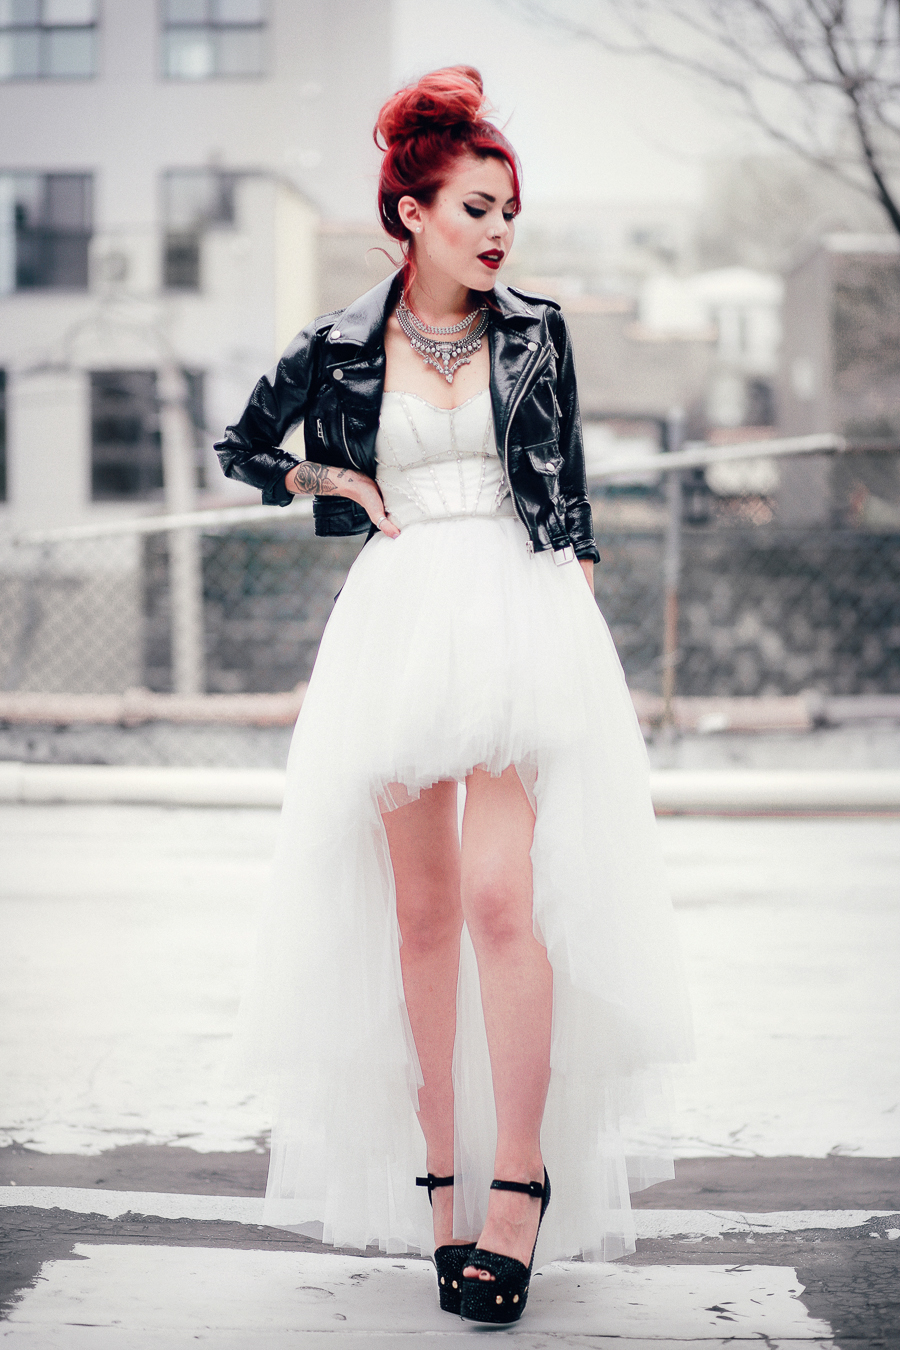 Le Happy wearing Nasty Gal Prom tulle dress and Giuseppe Zanotti pumps